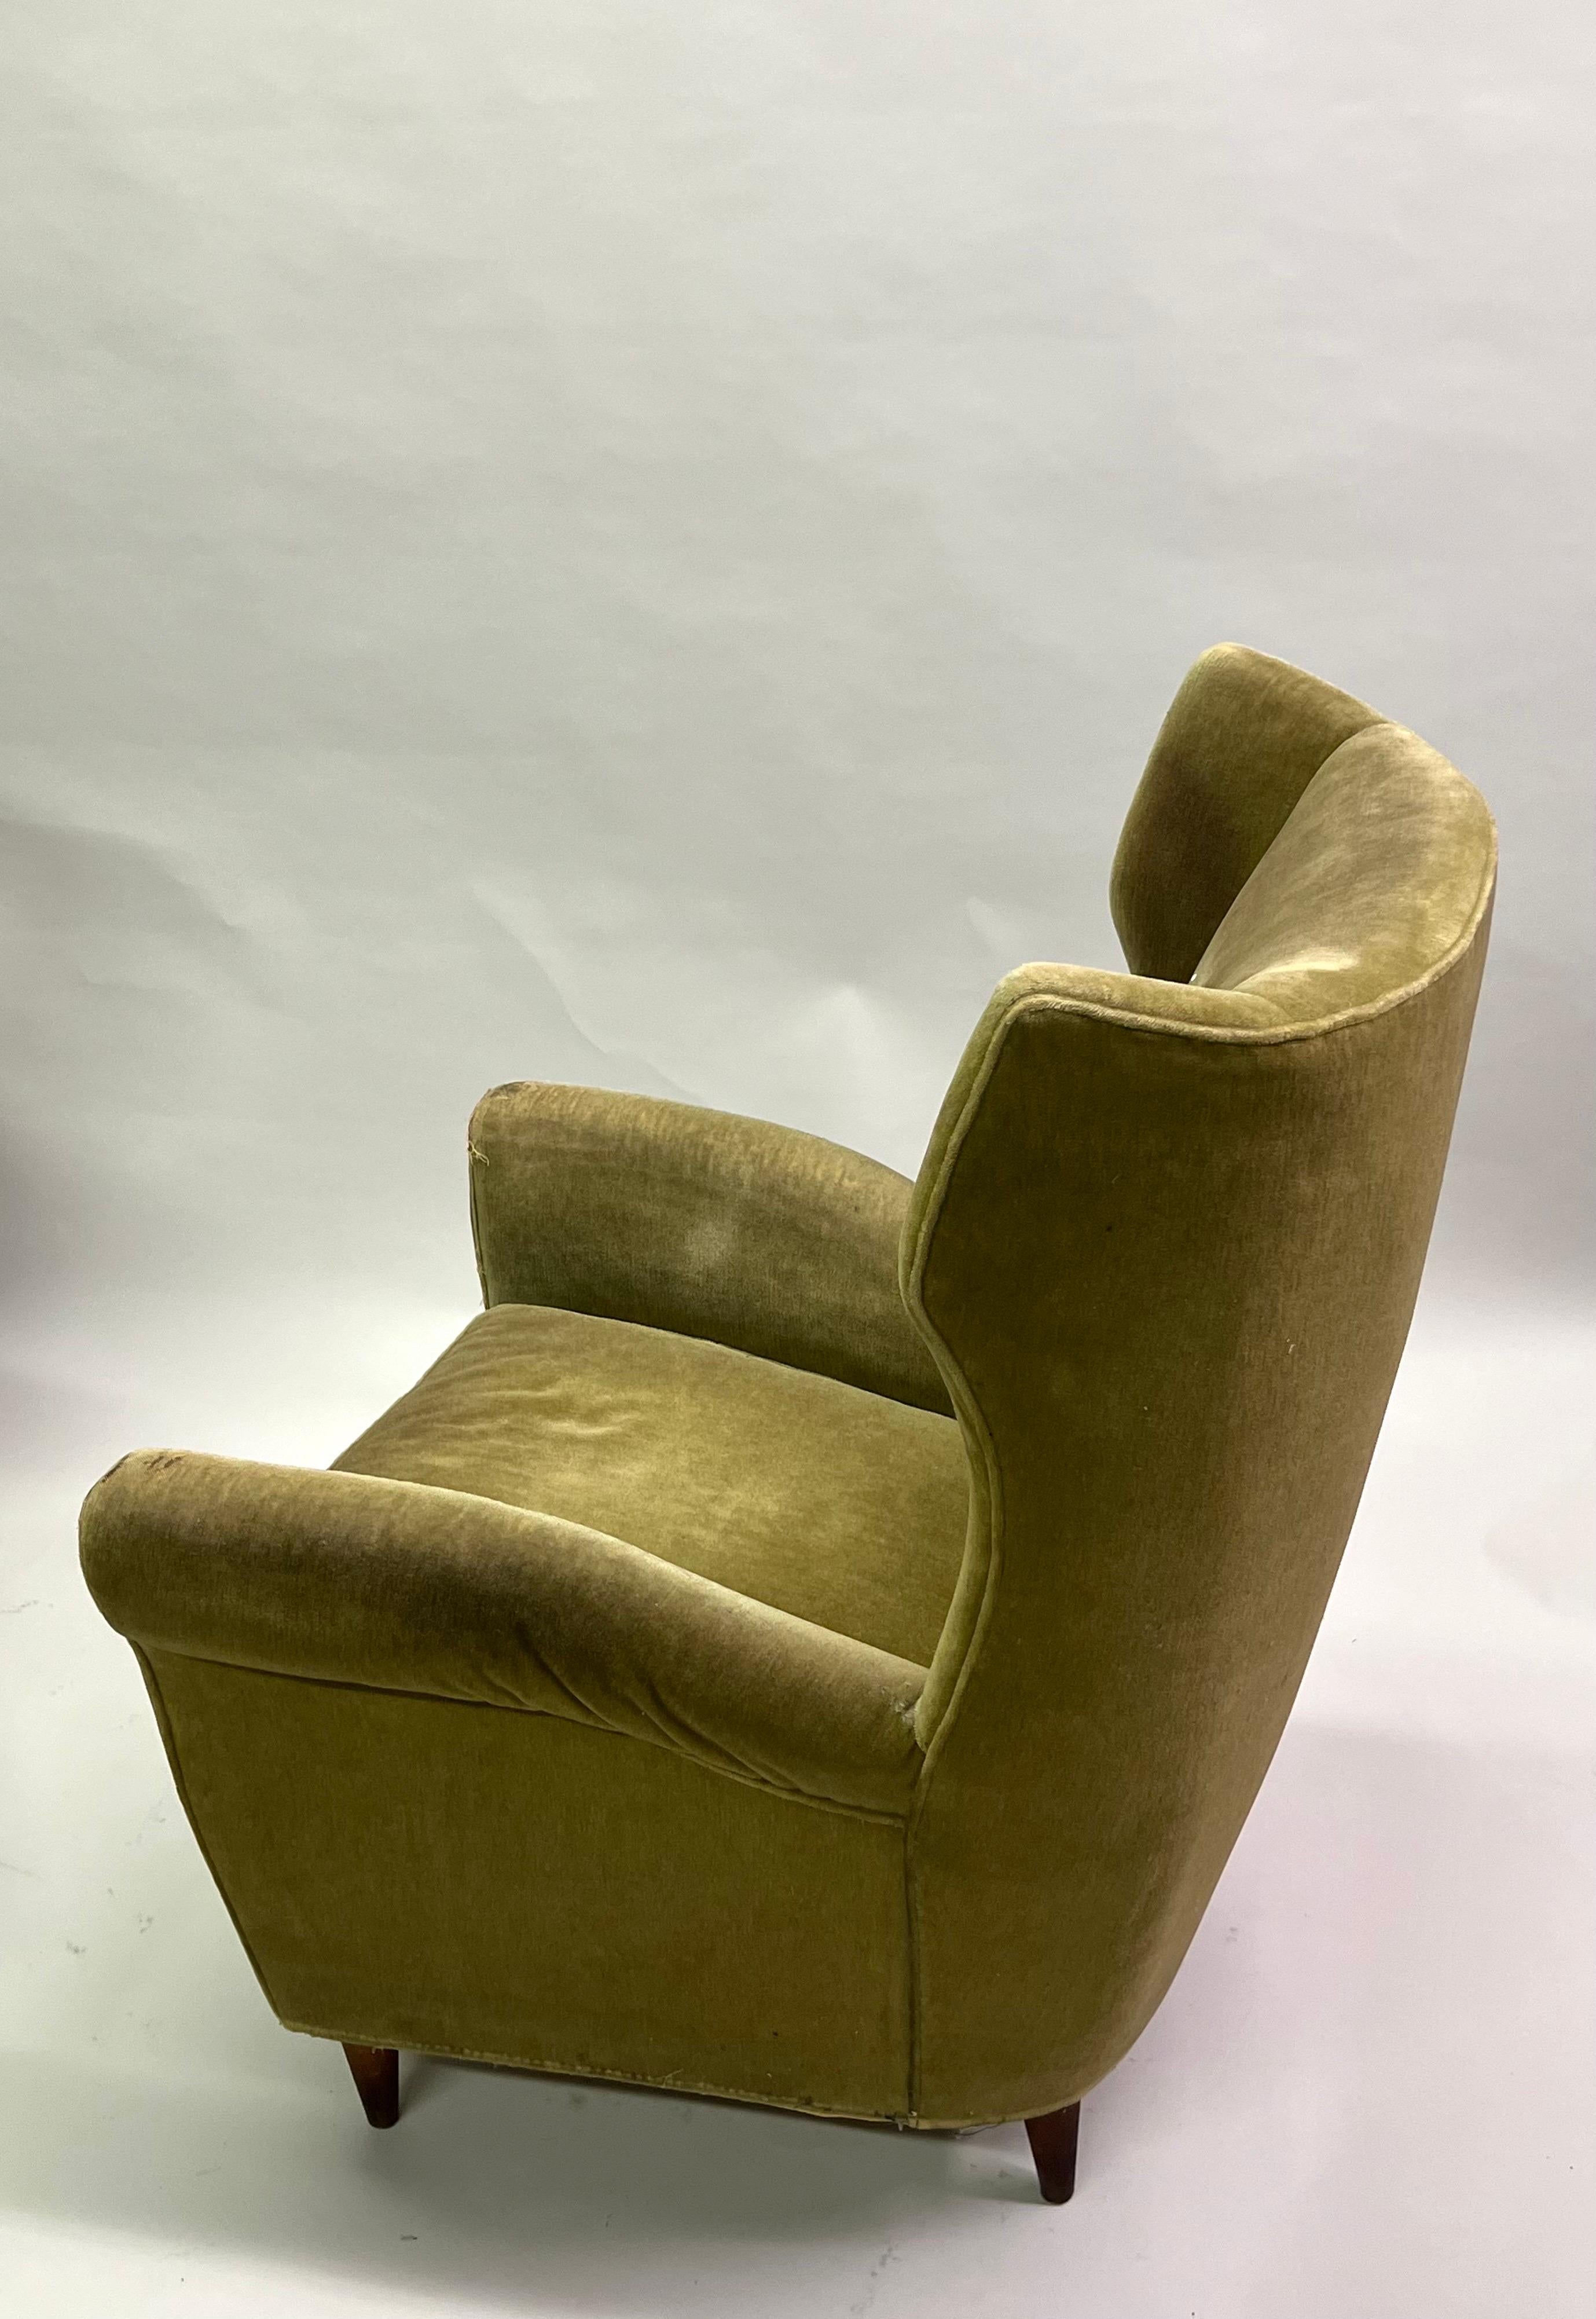 Pair of Italian Mid-Century Wingback Lounge Chairs Attr. to Gio Ponti, Model 512 For Sale 1